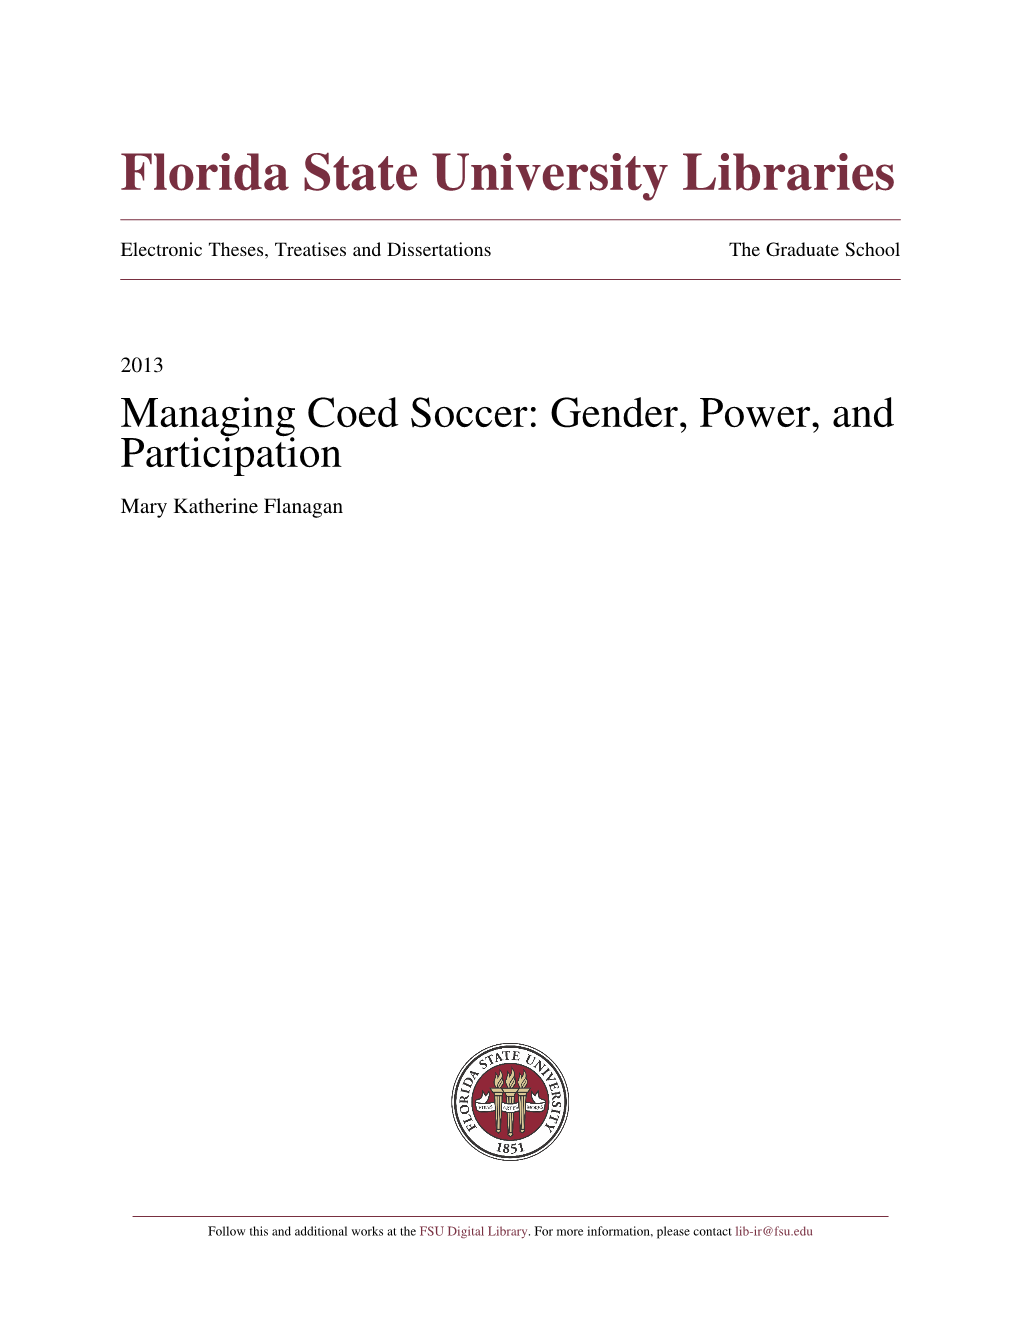 Managing Coed Soccer: Gender, Power, and Participation Mary Katherine Flanagan